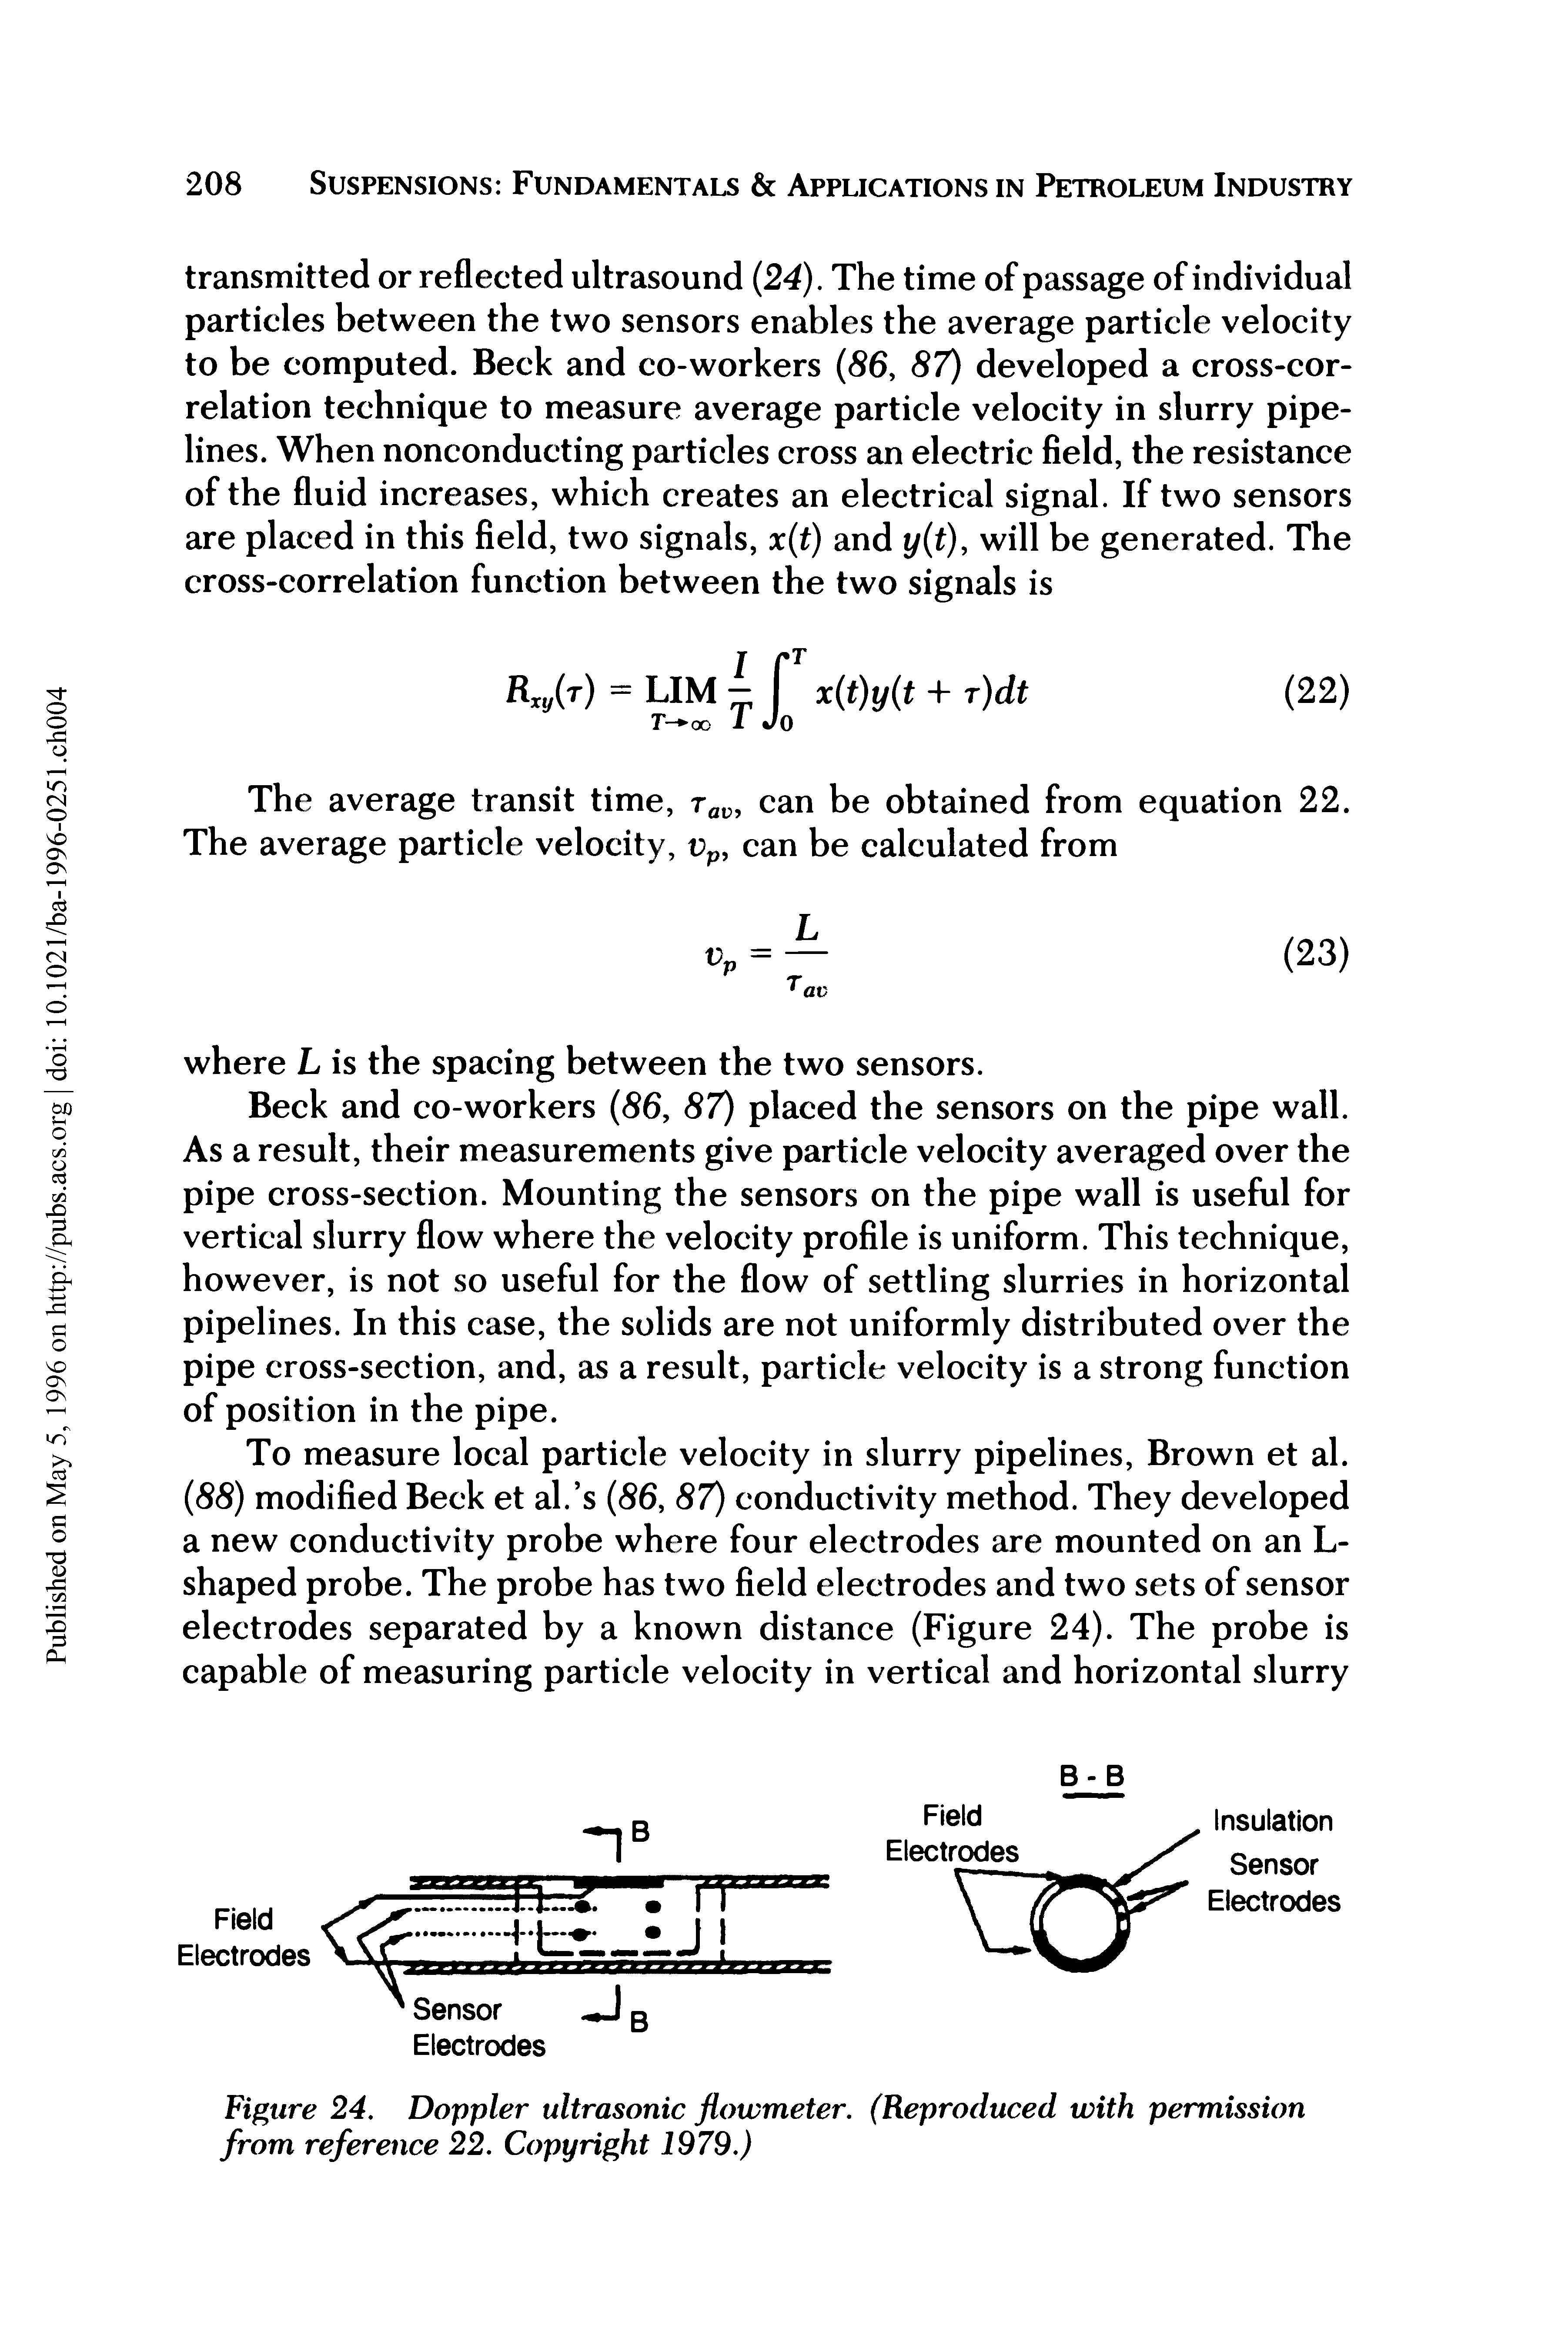 Figure 24. Doppler ultrasonic flowmeter. (Reproduced with permission from reference 22. Copyright 1979.)...